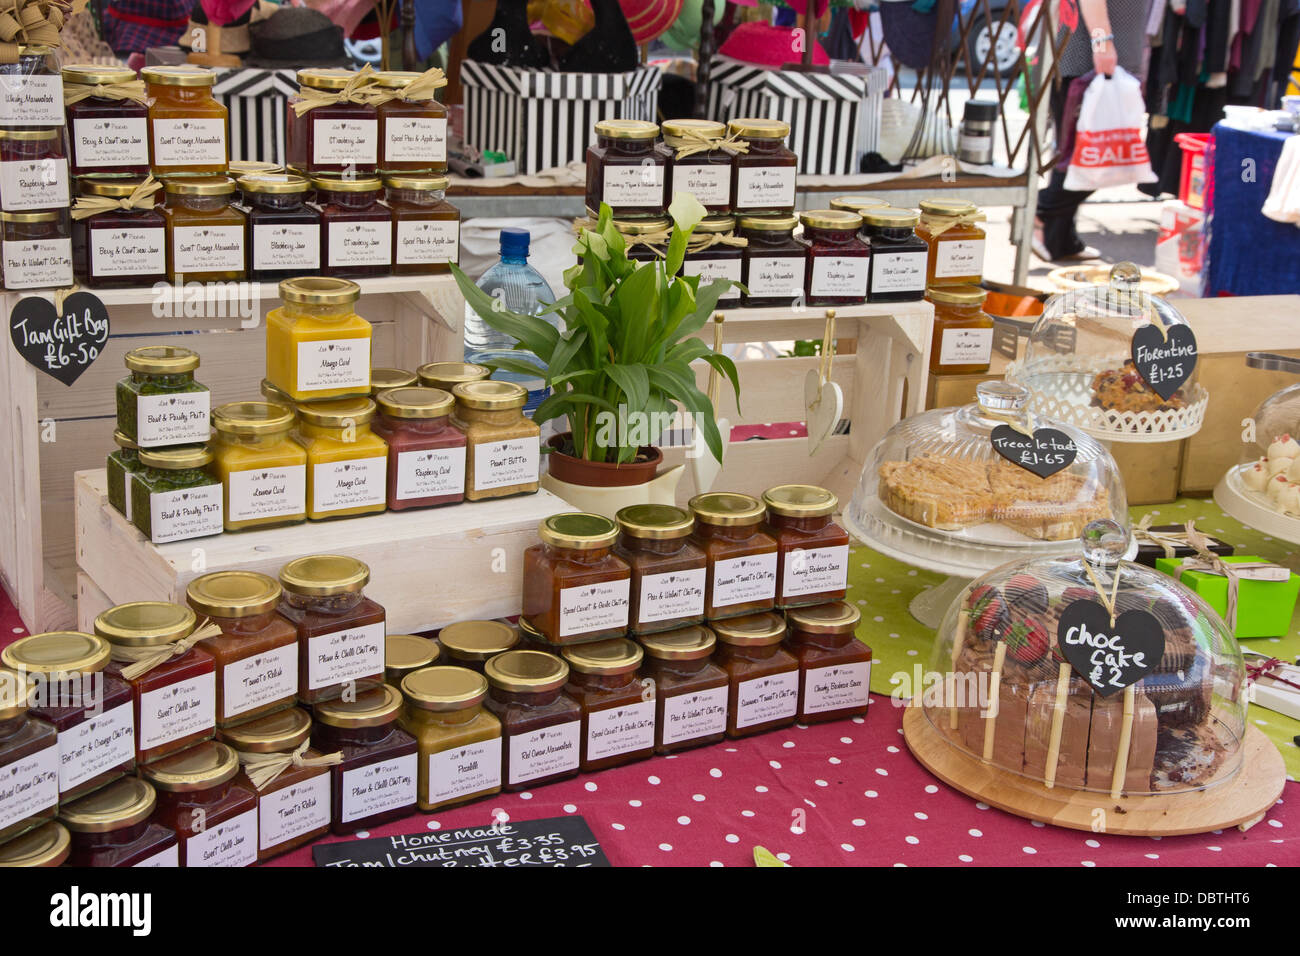 Preserves, relishes and cakes for sale on market stall, Ludlow Stock Photo